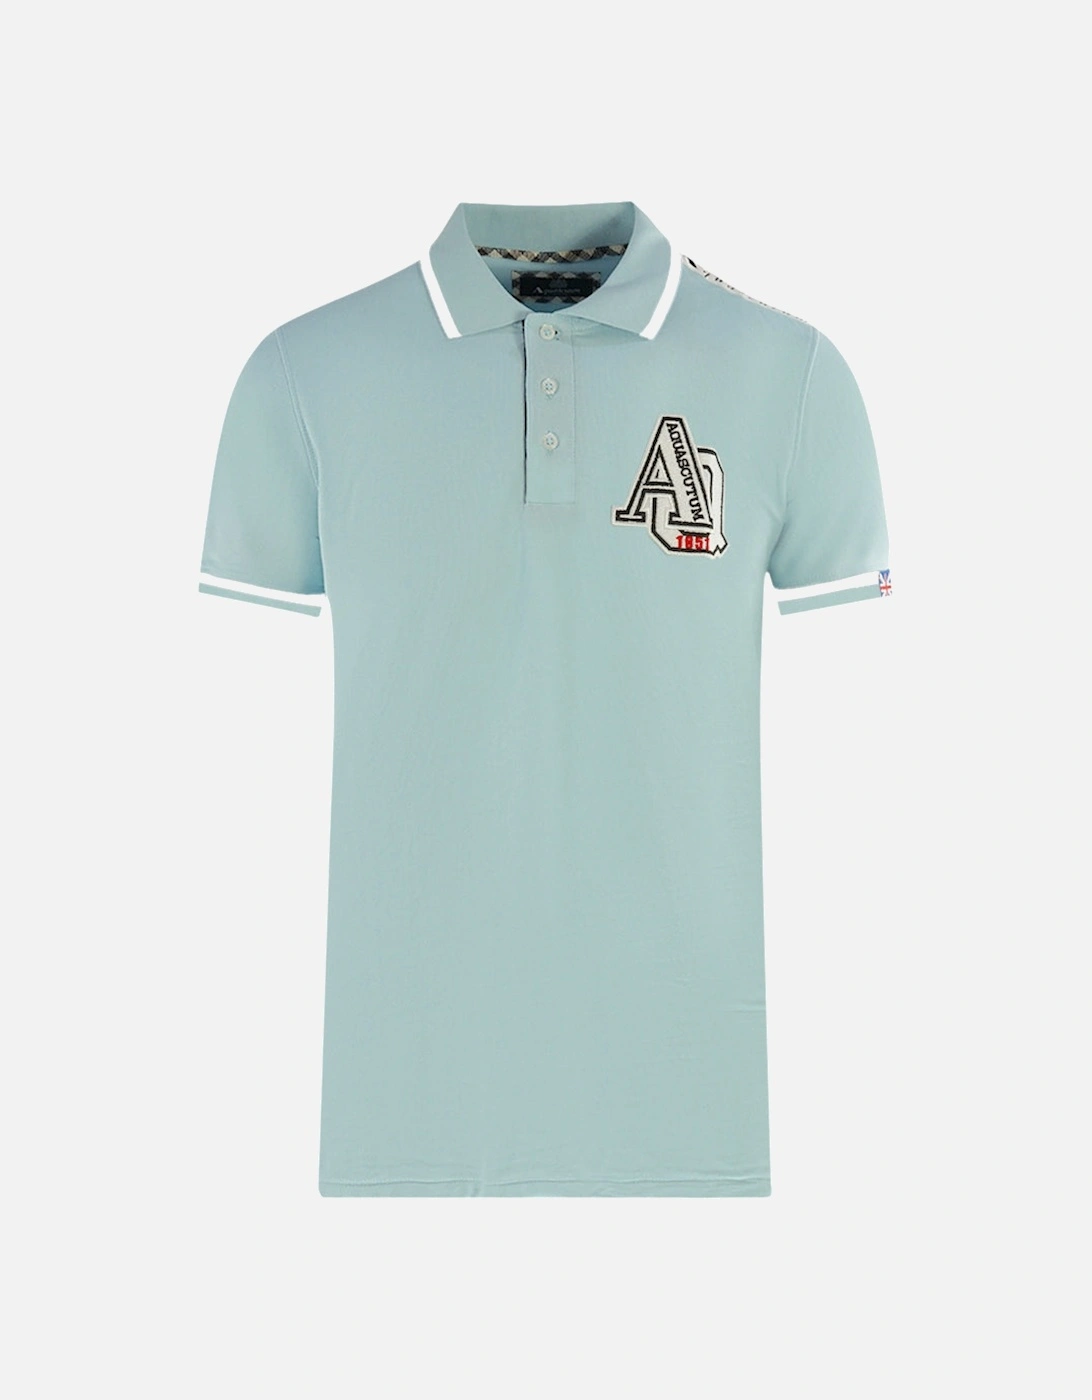 AQ 1851 Embroidered Tipped Light Blue Polo Shirt, 4 of 3